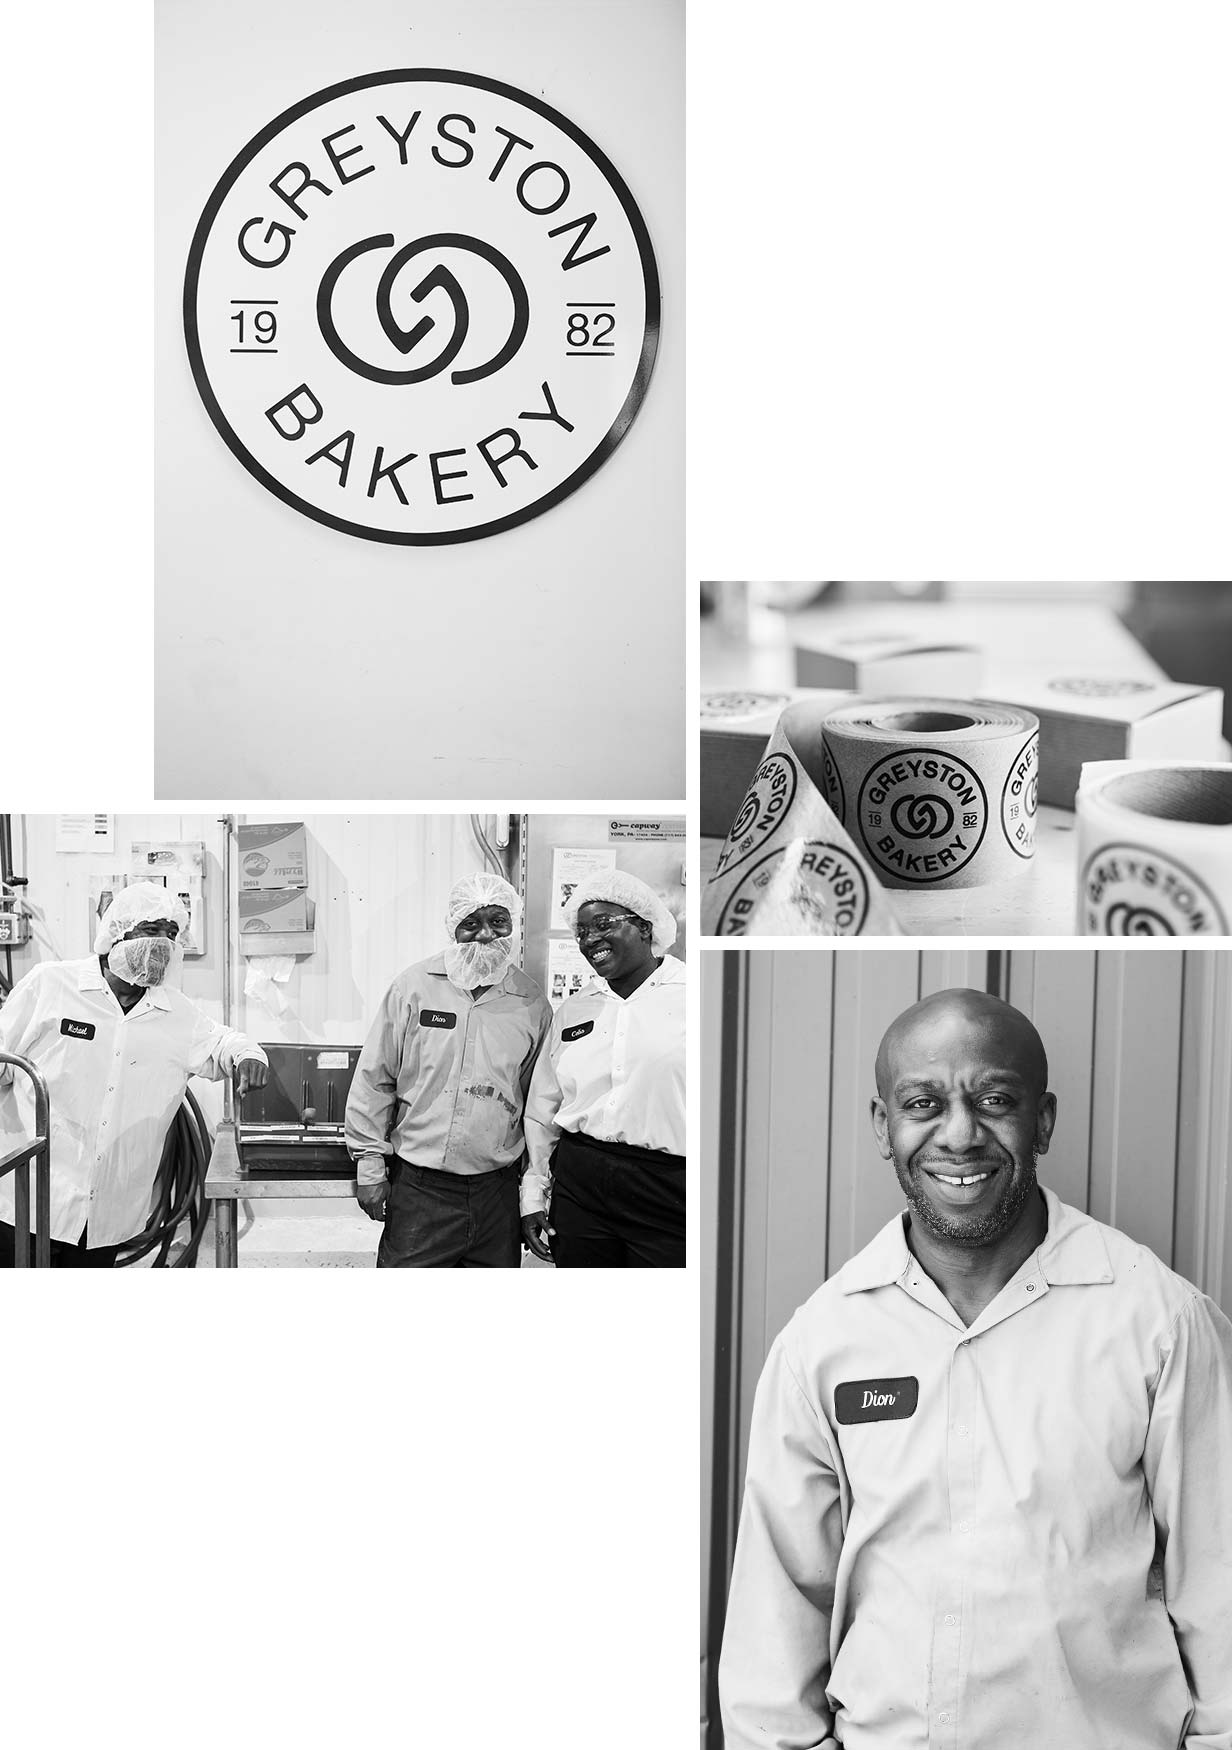 Greyston Bakery and its employees